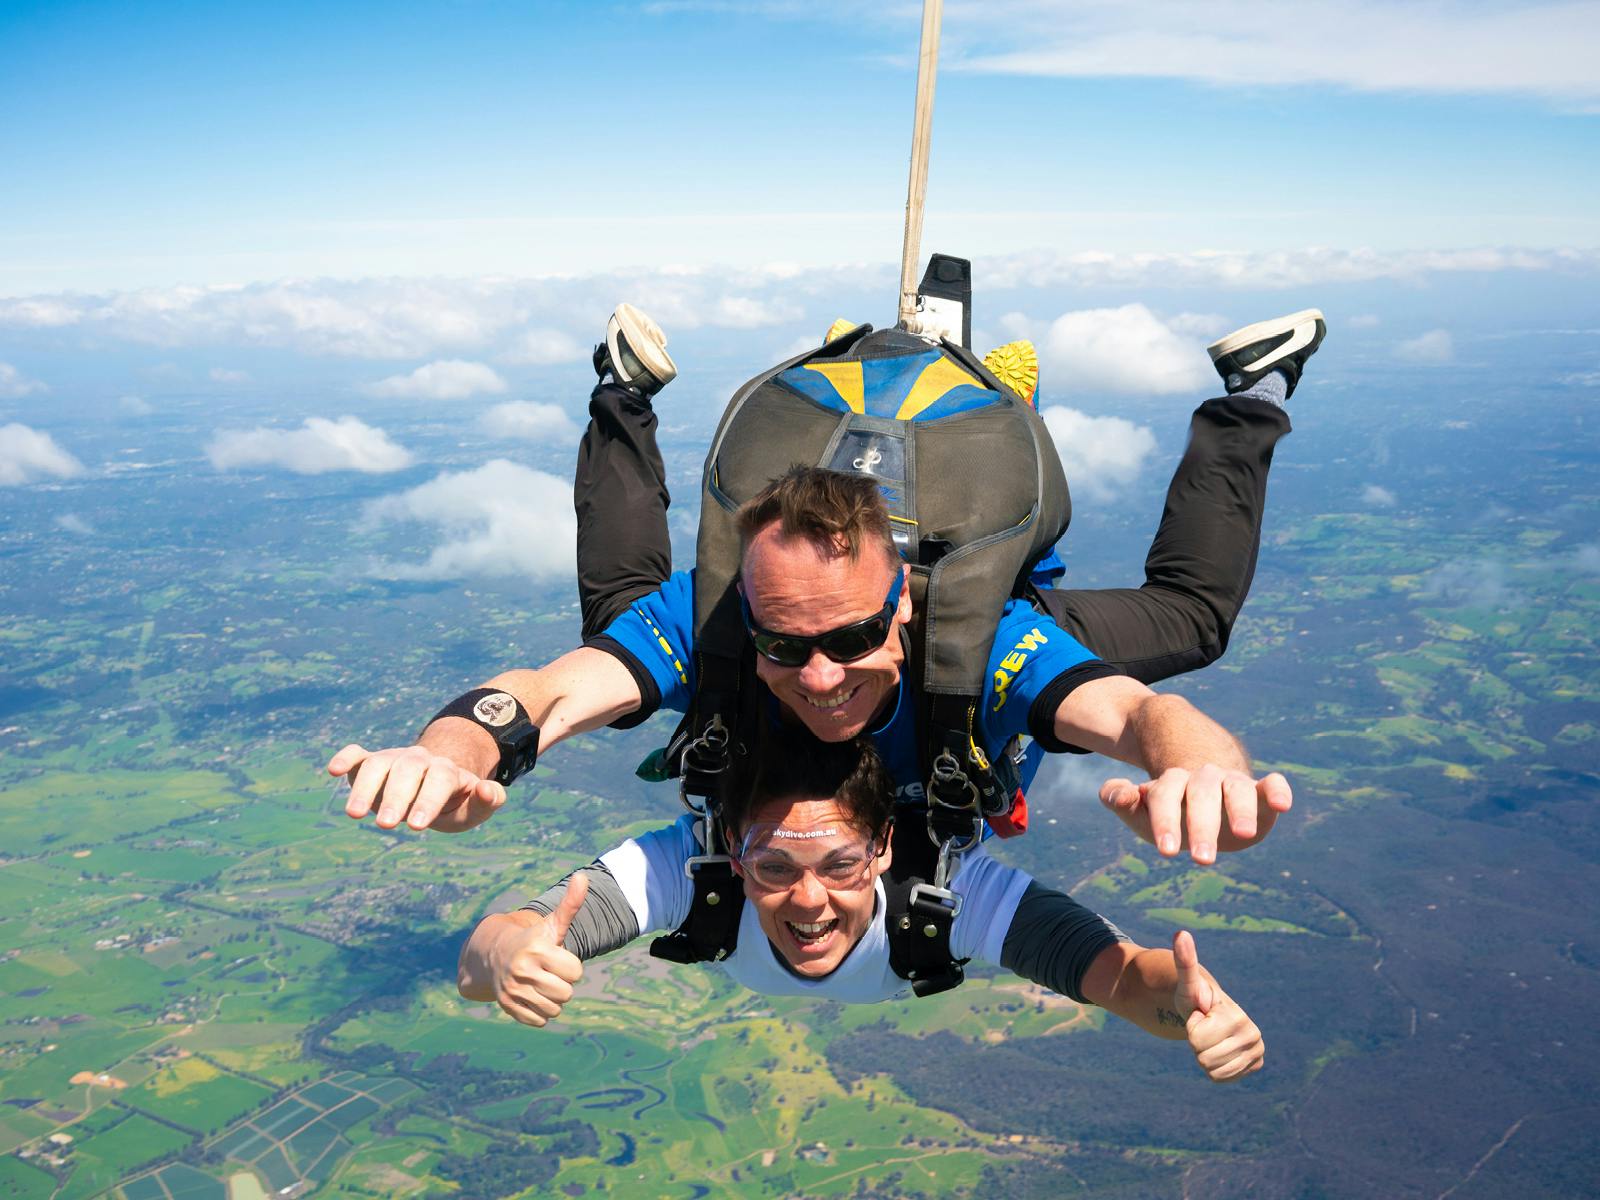 Skydiving experience over Yarra Valley